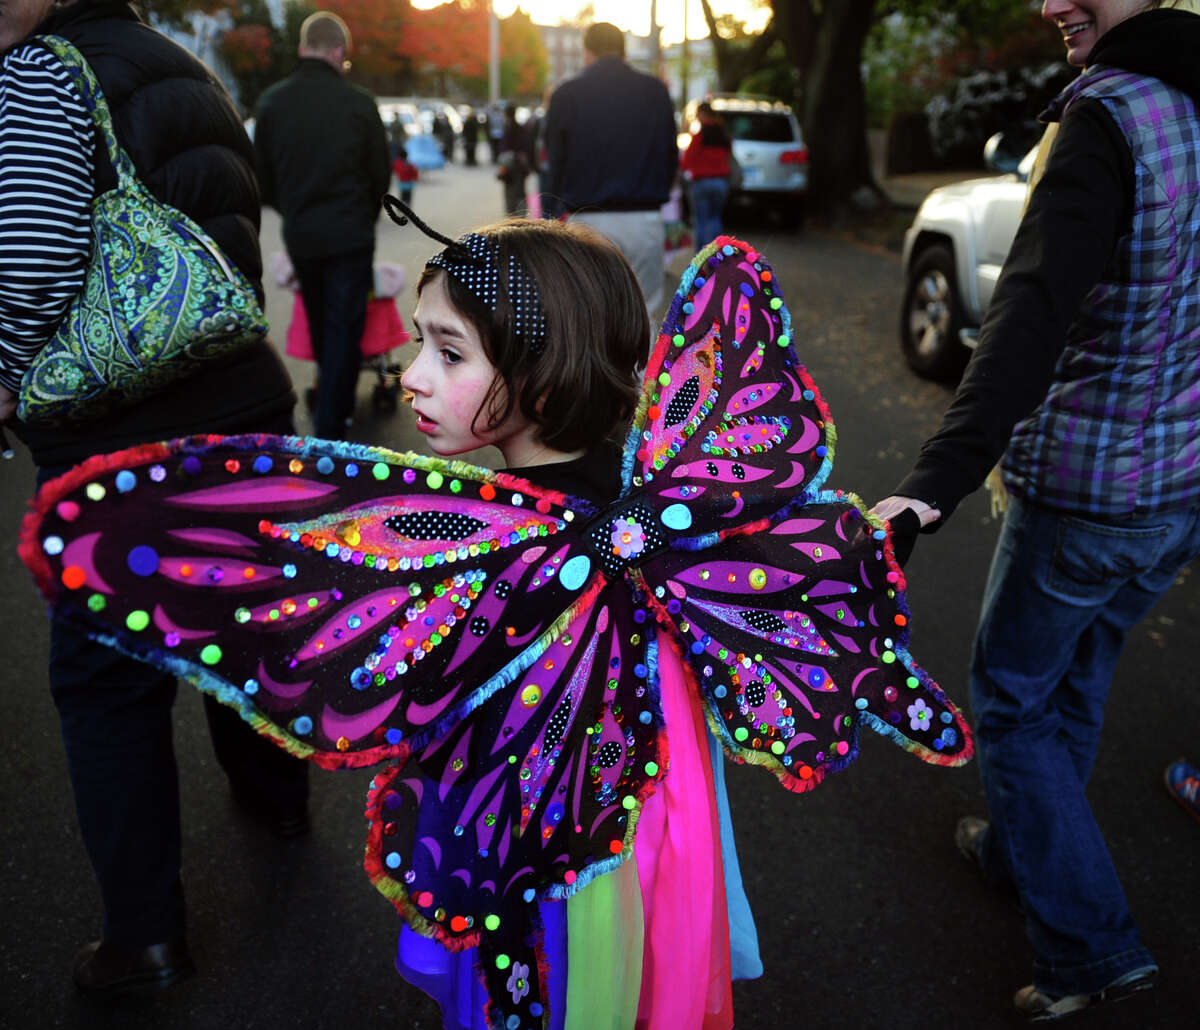 Rainbow butterfly Maggie Lupa, 6, of Bridgeport, floats along Tuesday, Oct. 29, 2013 during the 5th Annual Black Rock Halloween Parade & Block Party beginning at Ellsworth Park and ending at the Black Rock Branch Library. The Black Rock neighborhood ZIP code, 06605, came in 12th on a list of top trick-or-treating territories in all of Southwestern Connecticut. Bridgeport's 06606 came in second place to Stamford's 06902.